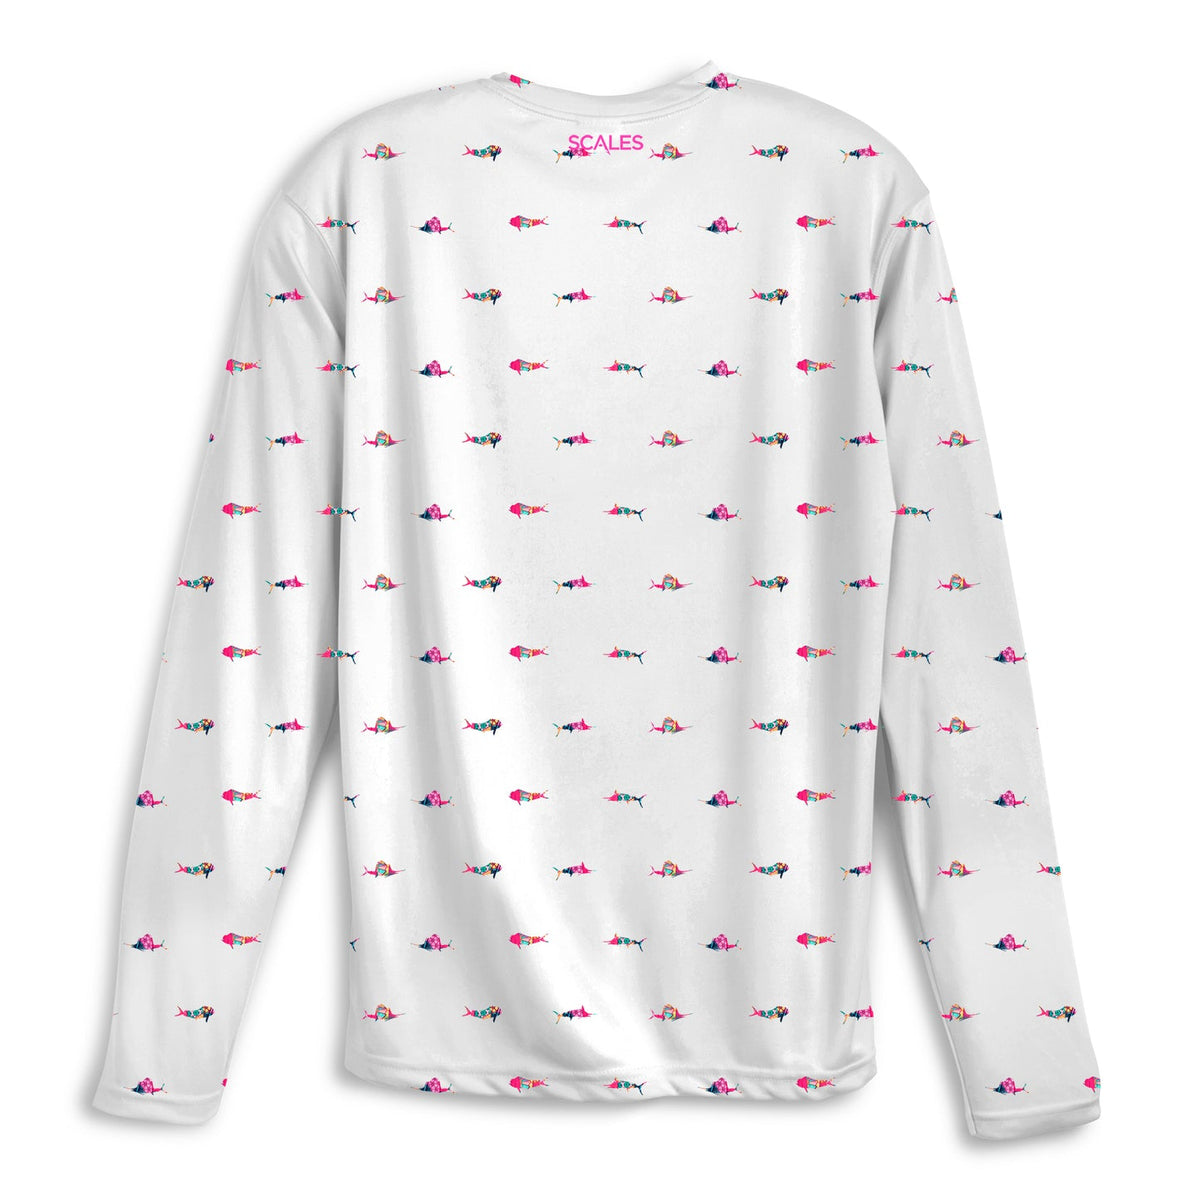 SCALES Trippy Fish Long Sleeve Performance Shirt